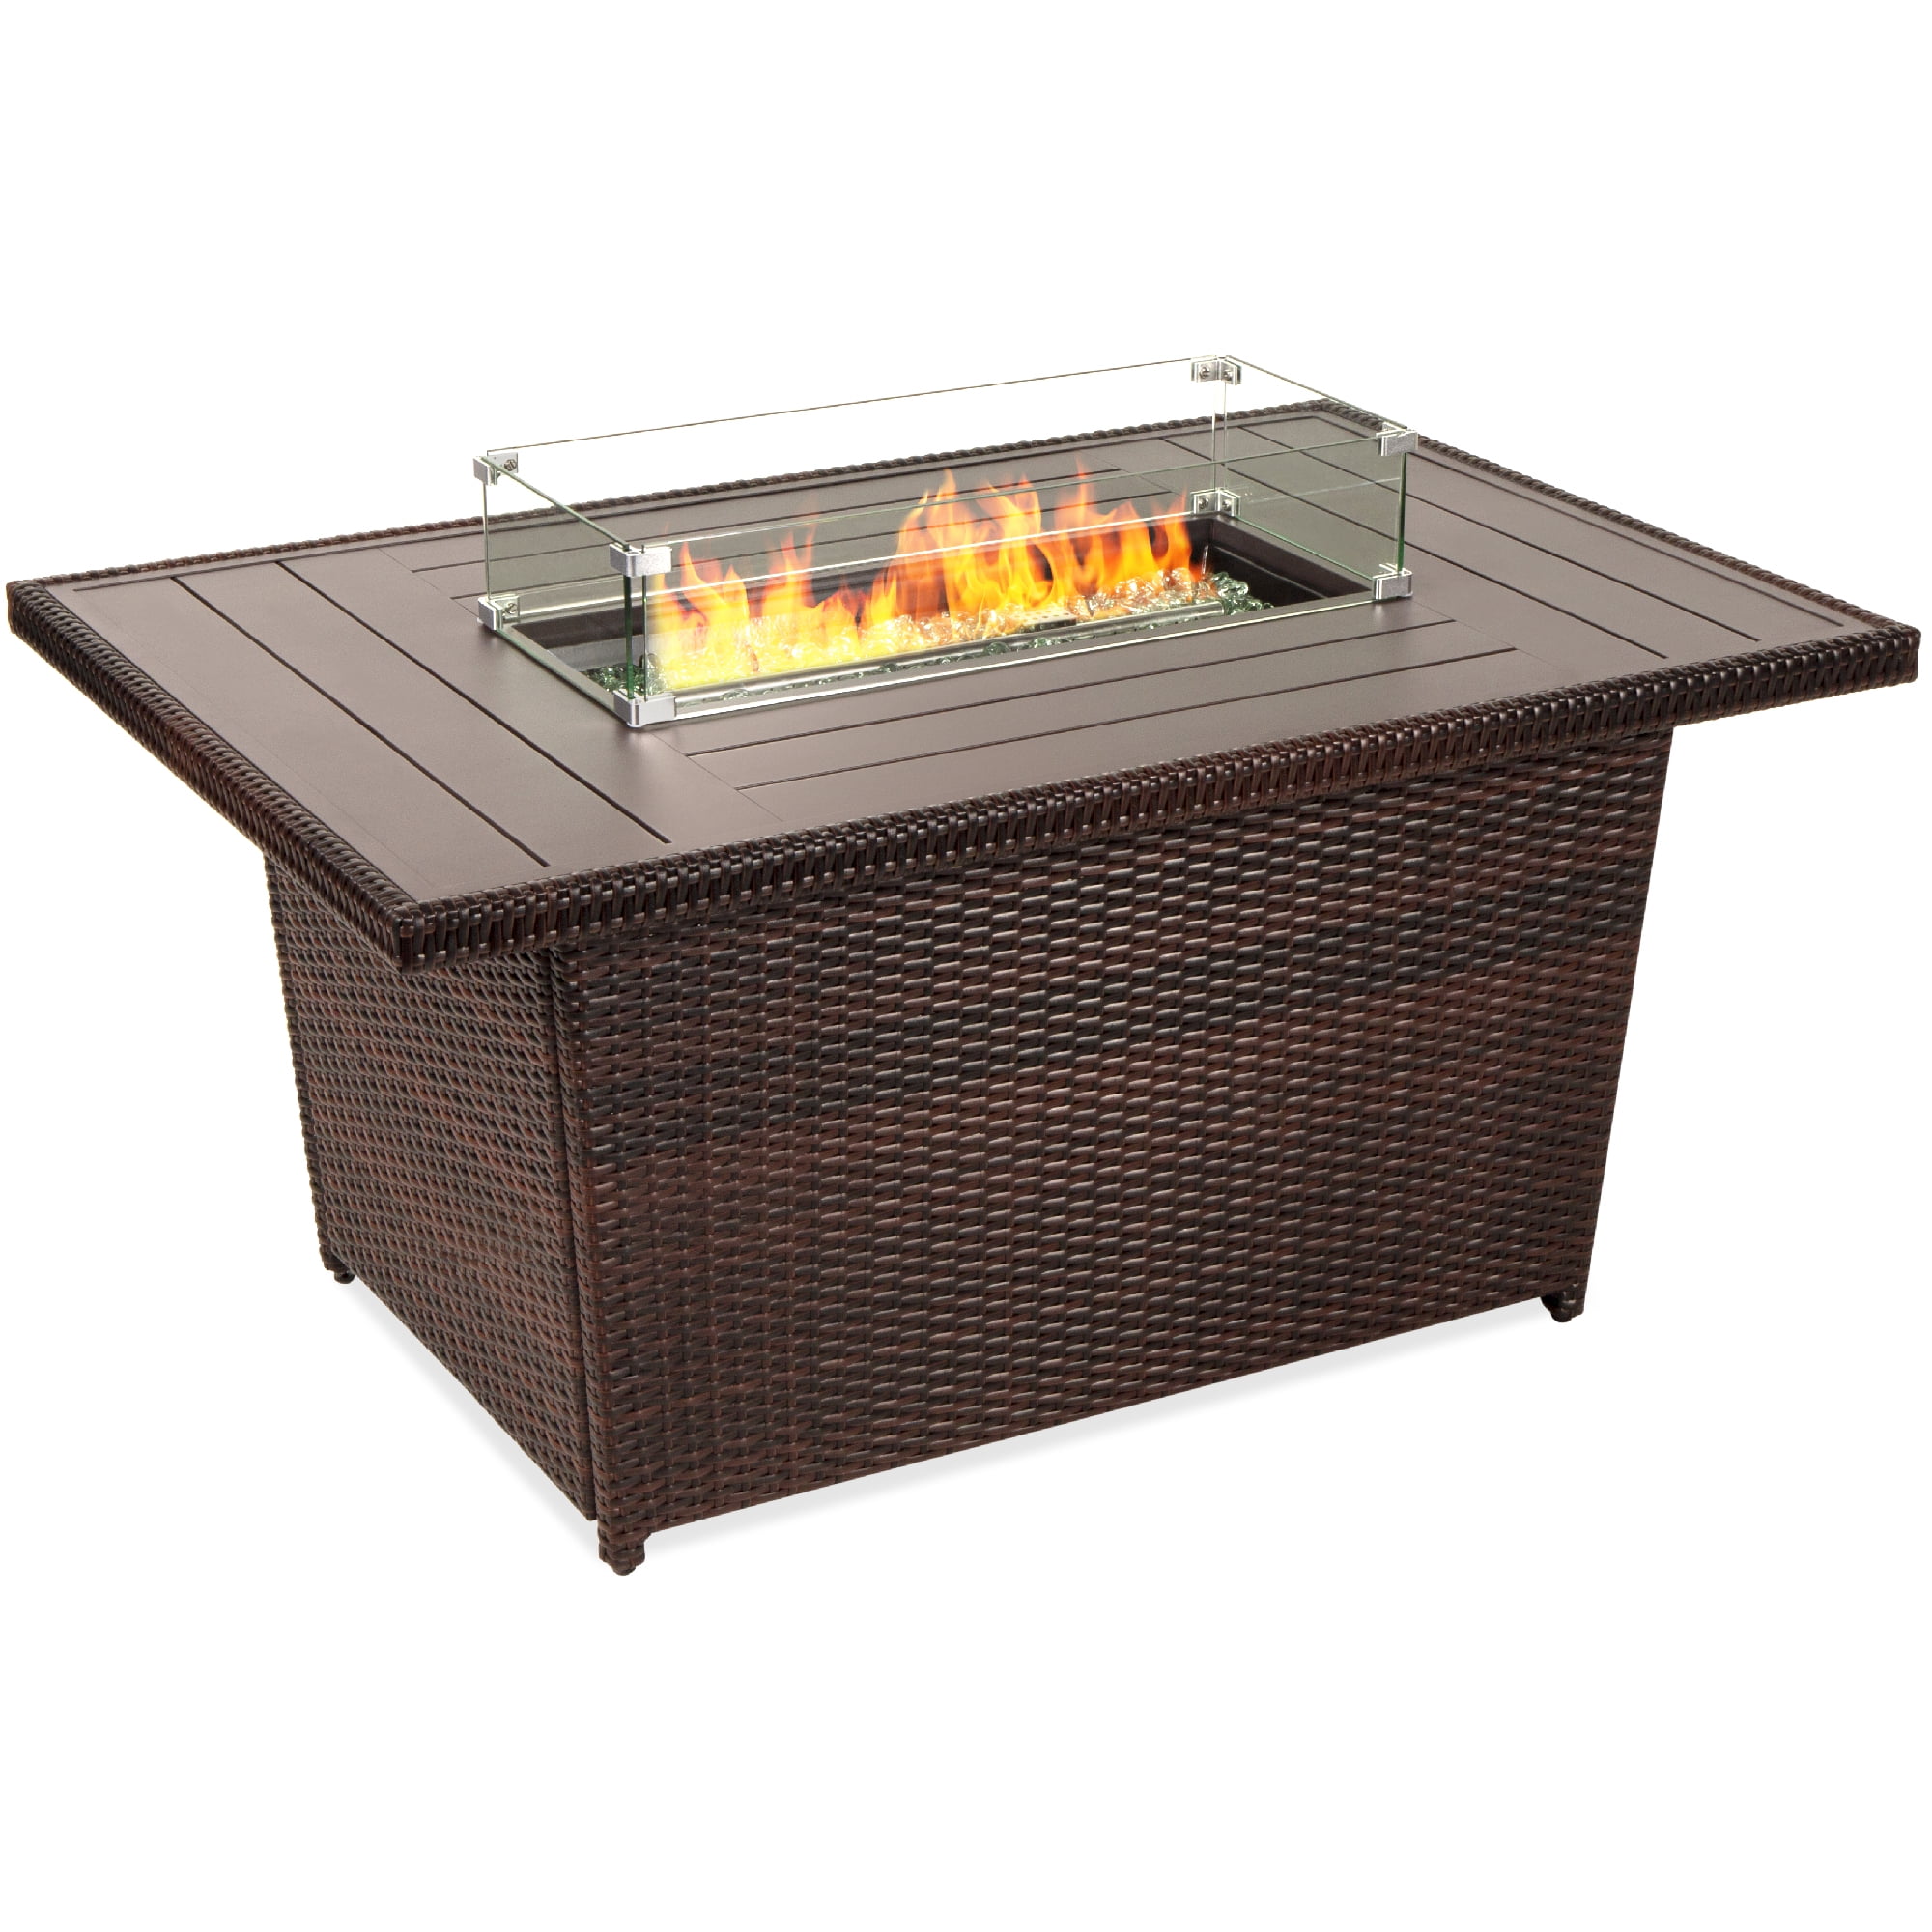 52in Wicker Propane Gas Fire Pit Table, Round Fire Pit With Propane Tank Inside